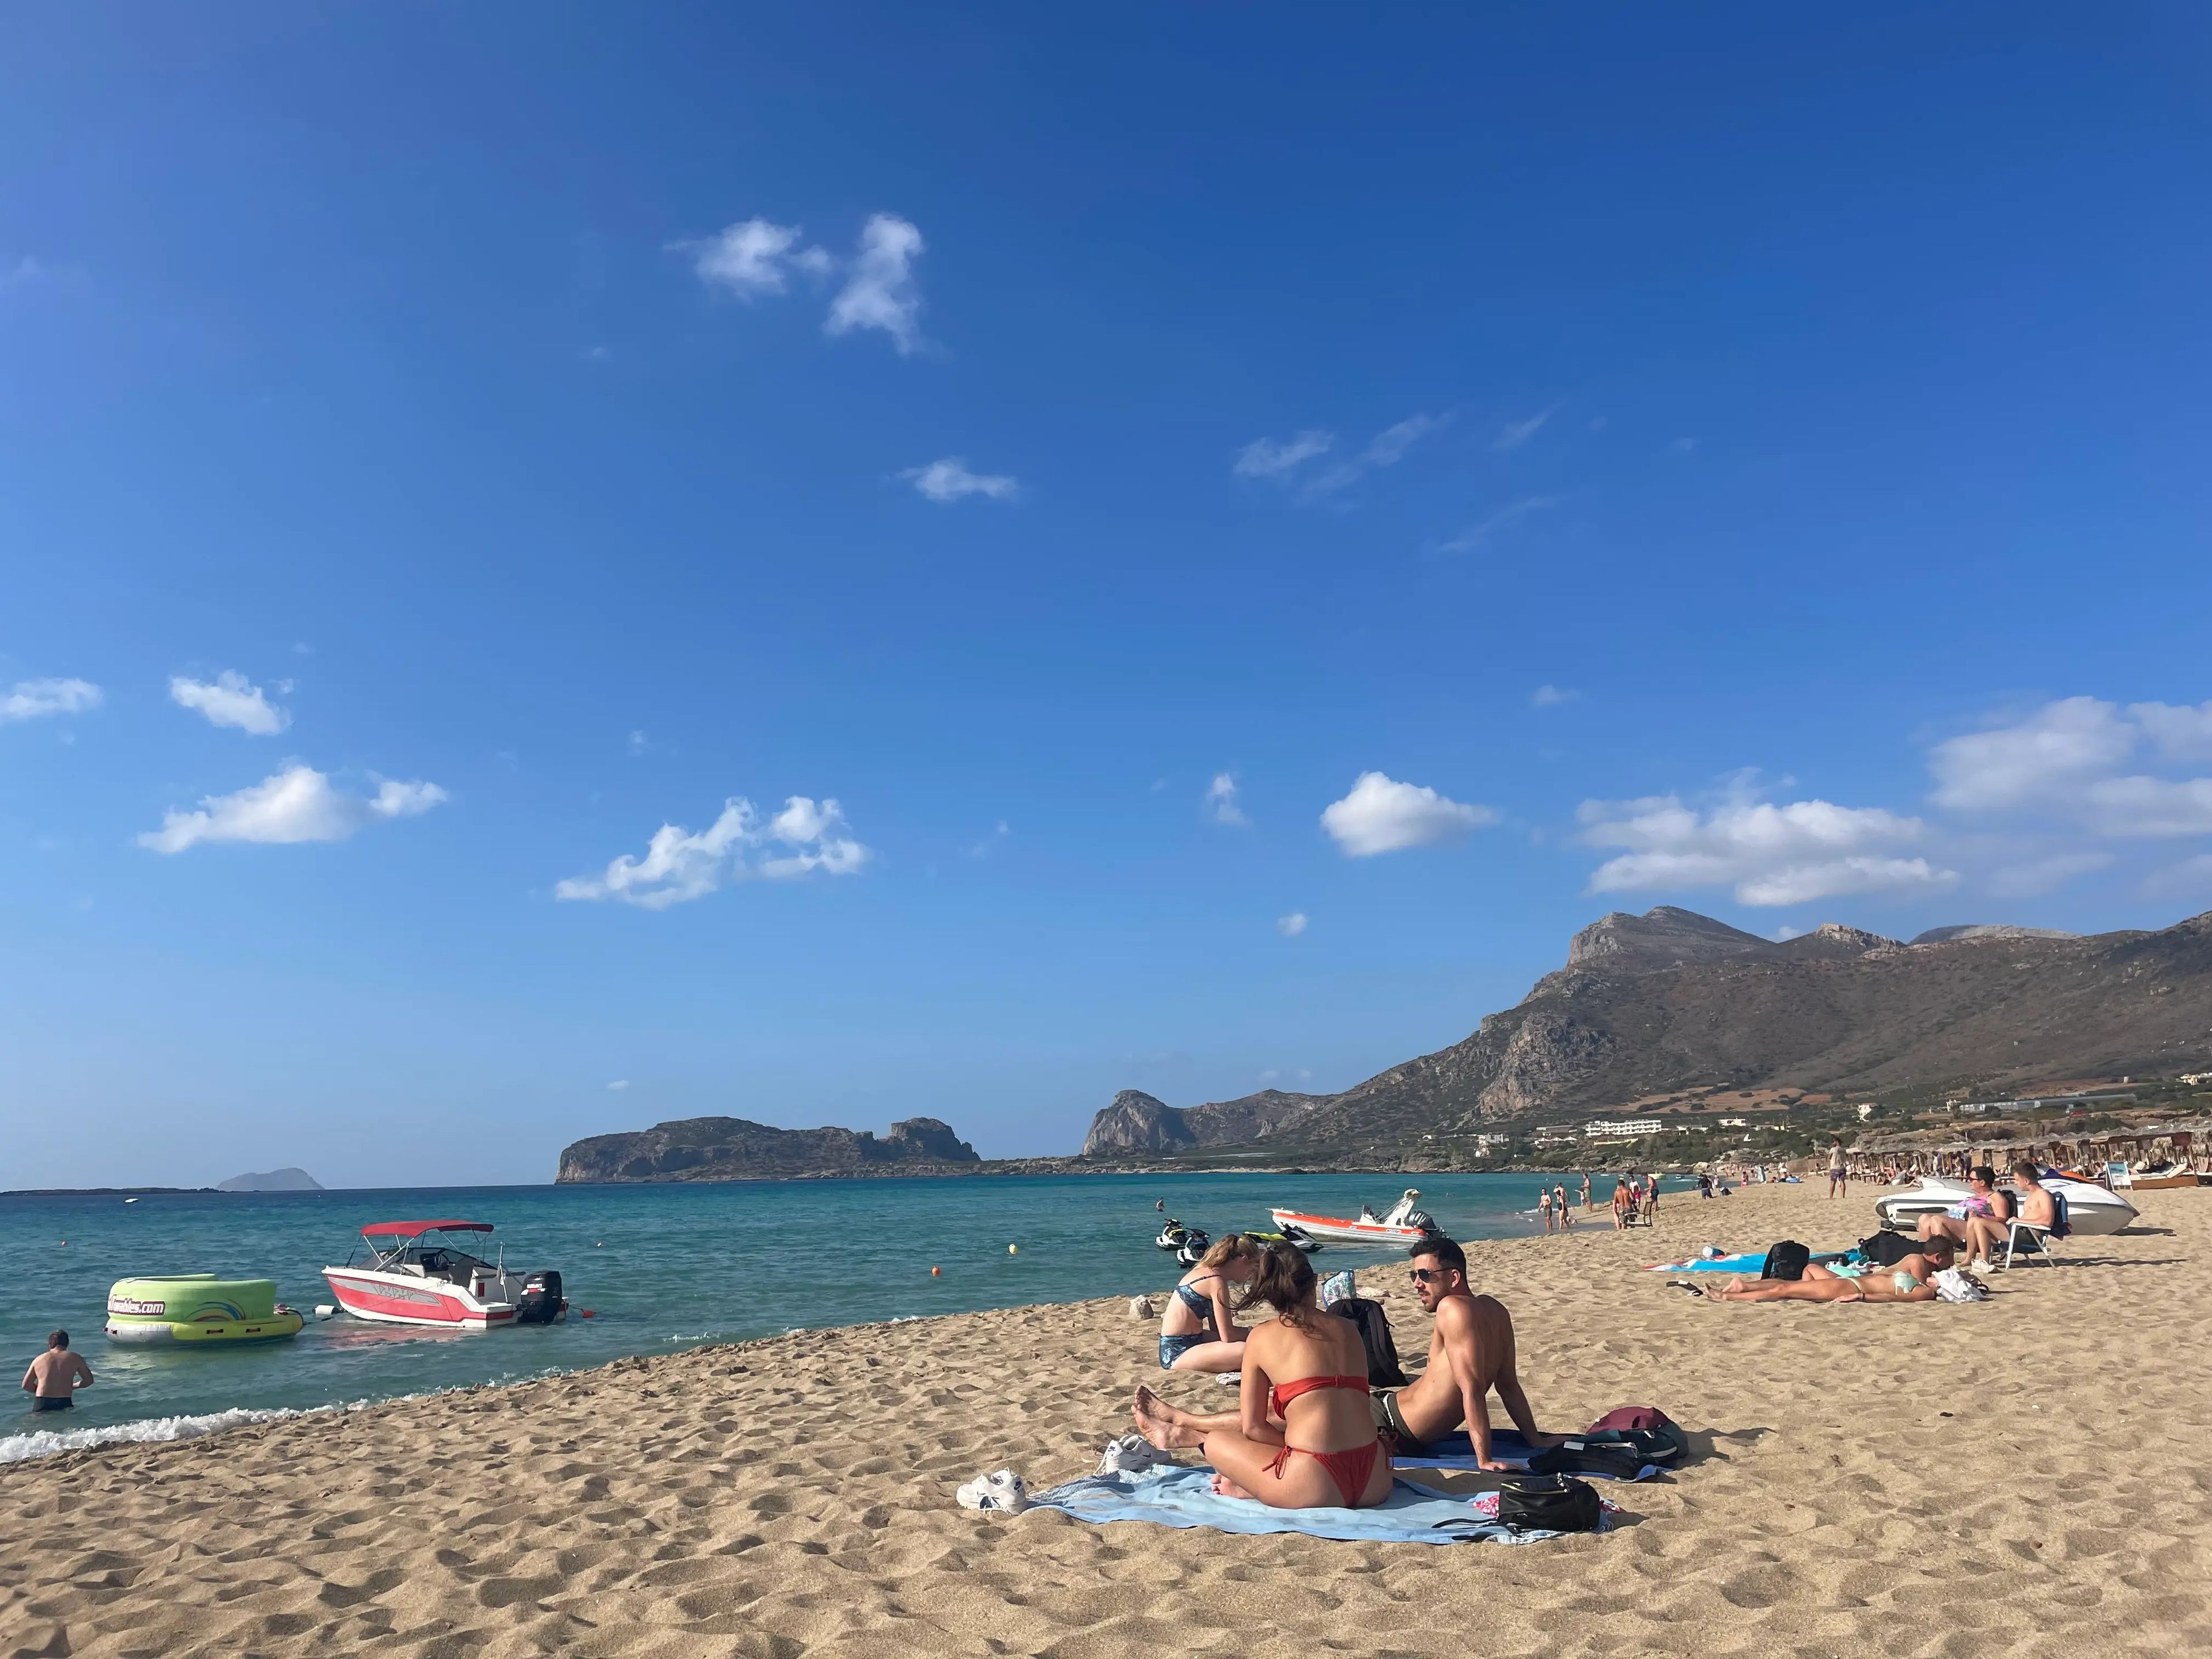 people lounging in the sand at falasarna beach in create greece